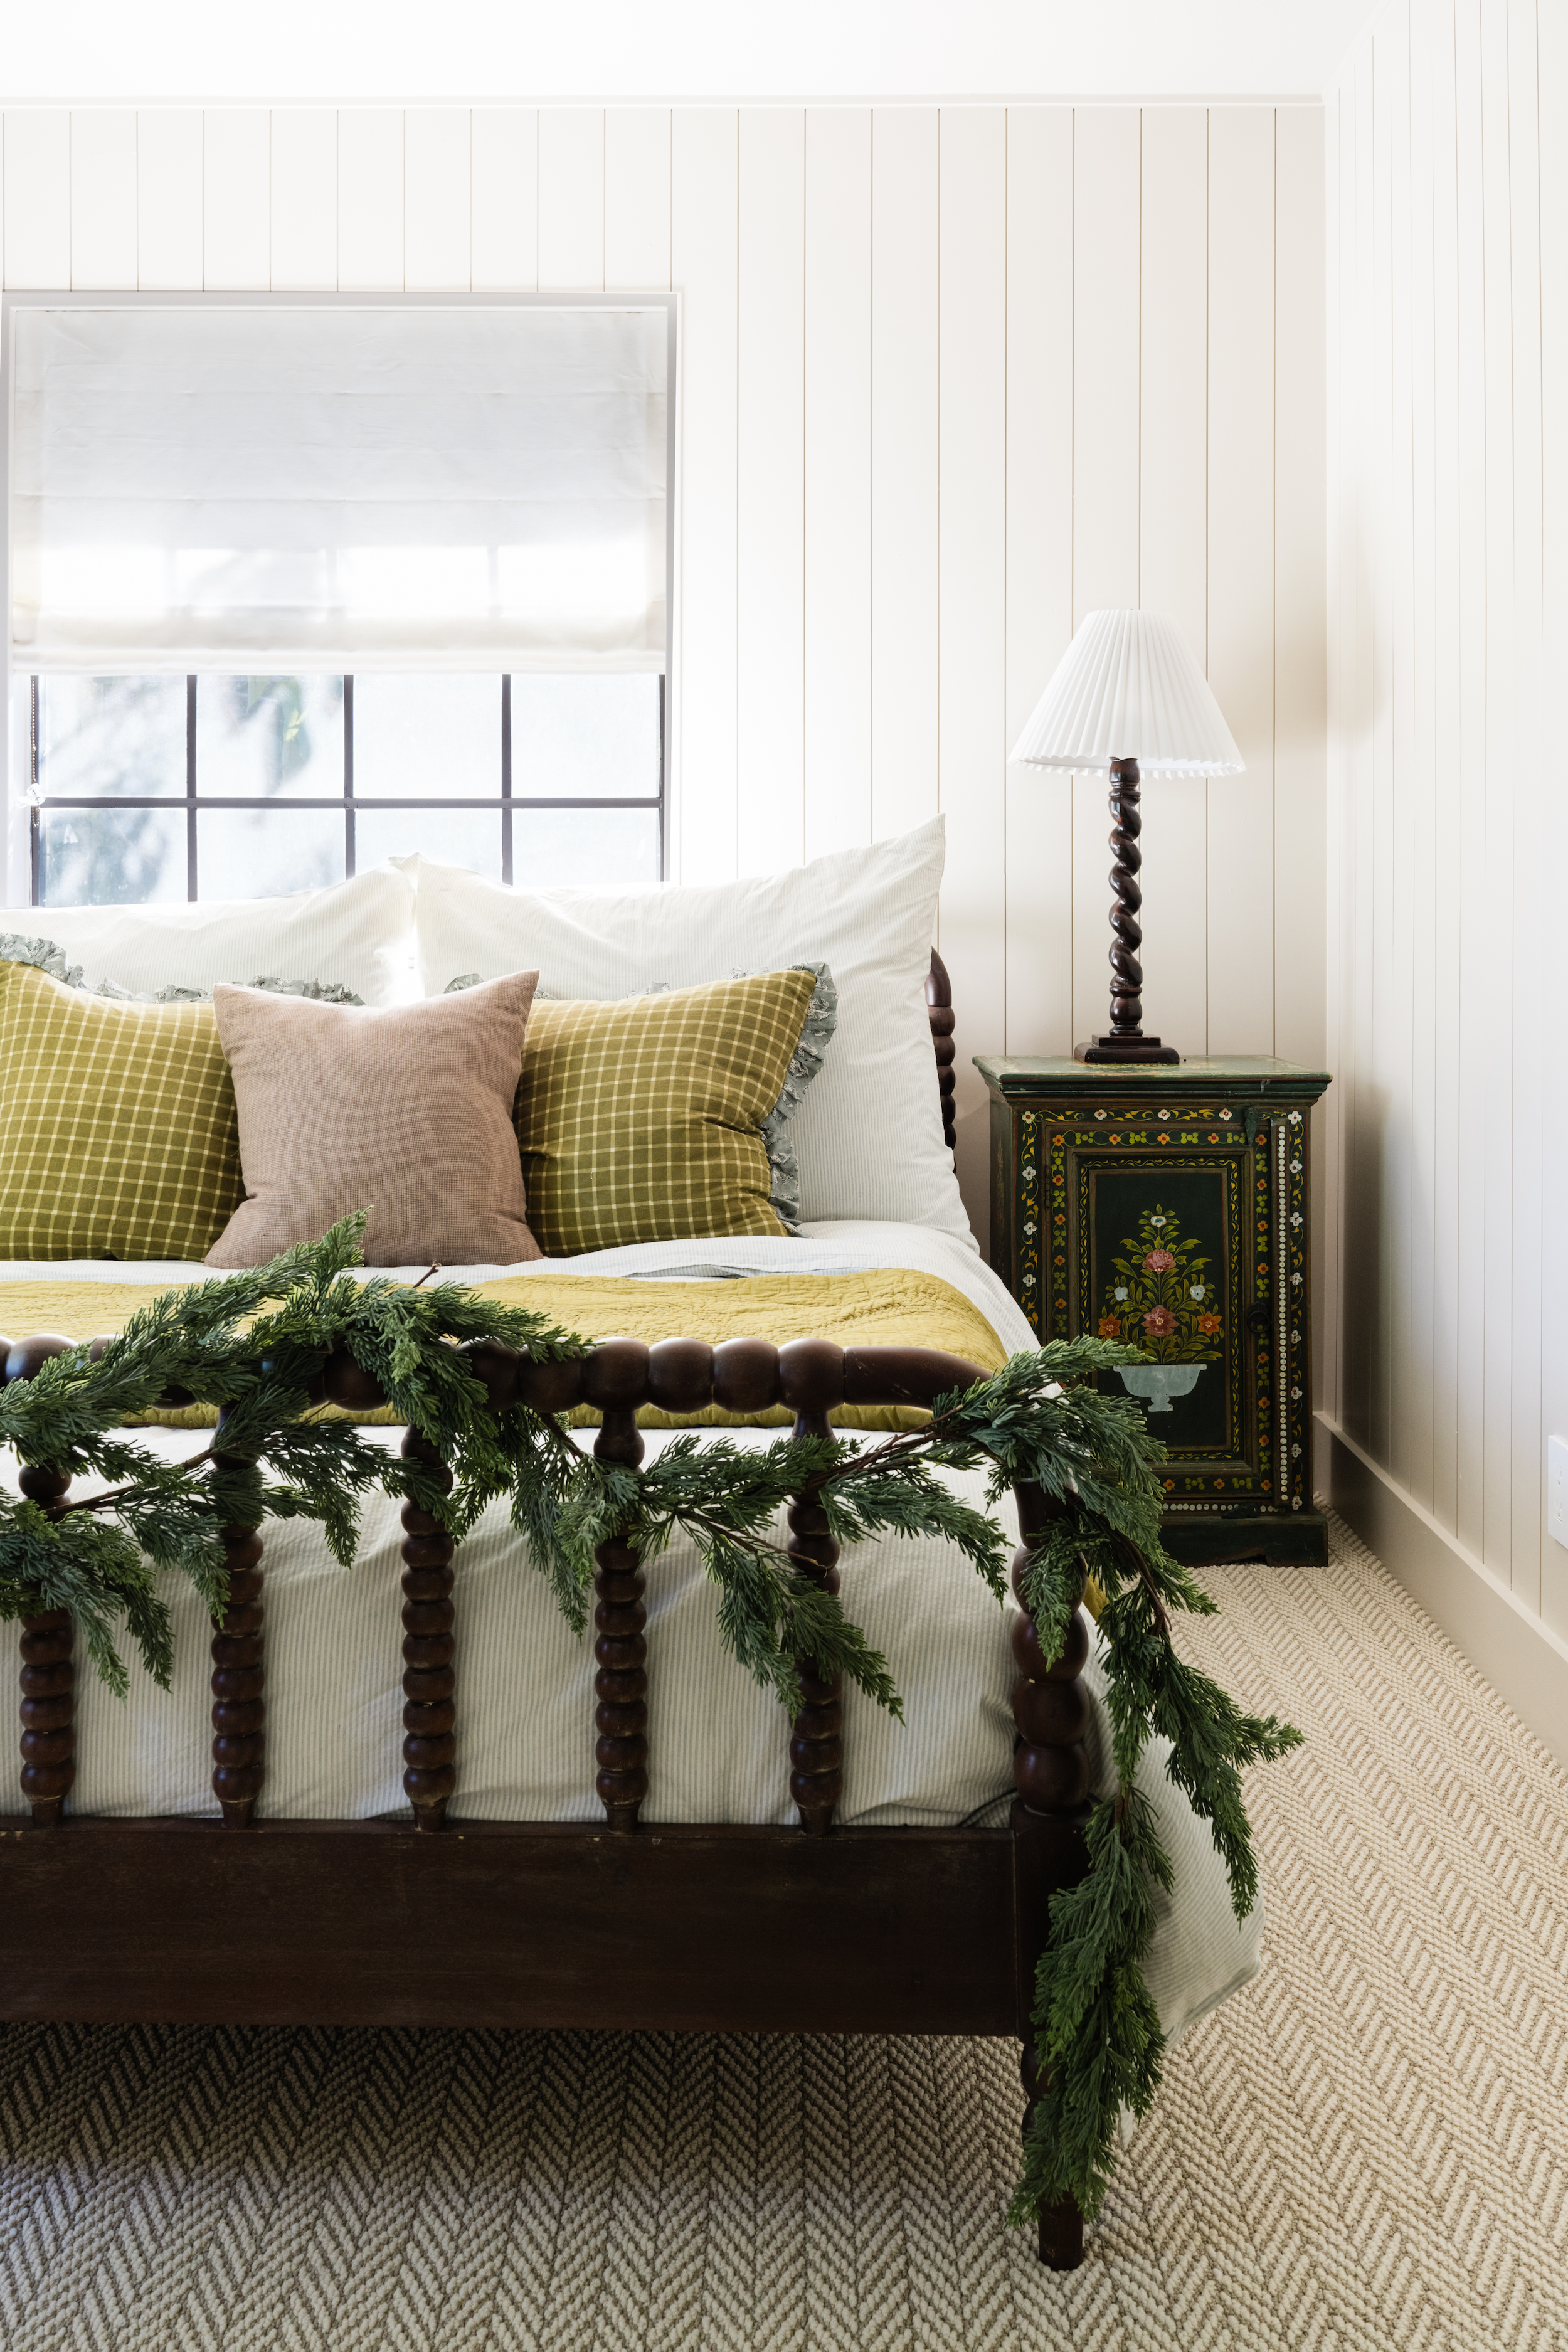 cypress garland decorating the footboard of a spindle bed bedroom holiday decor ideas